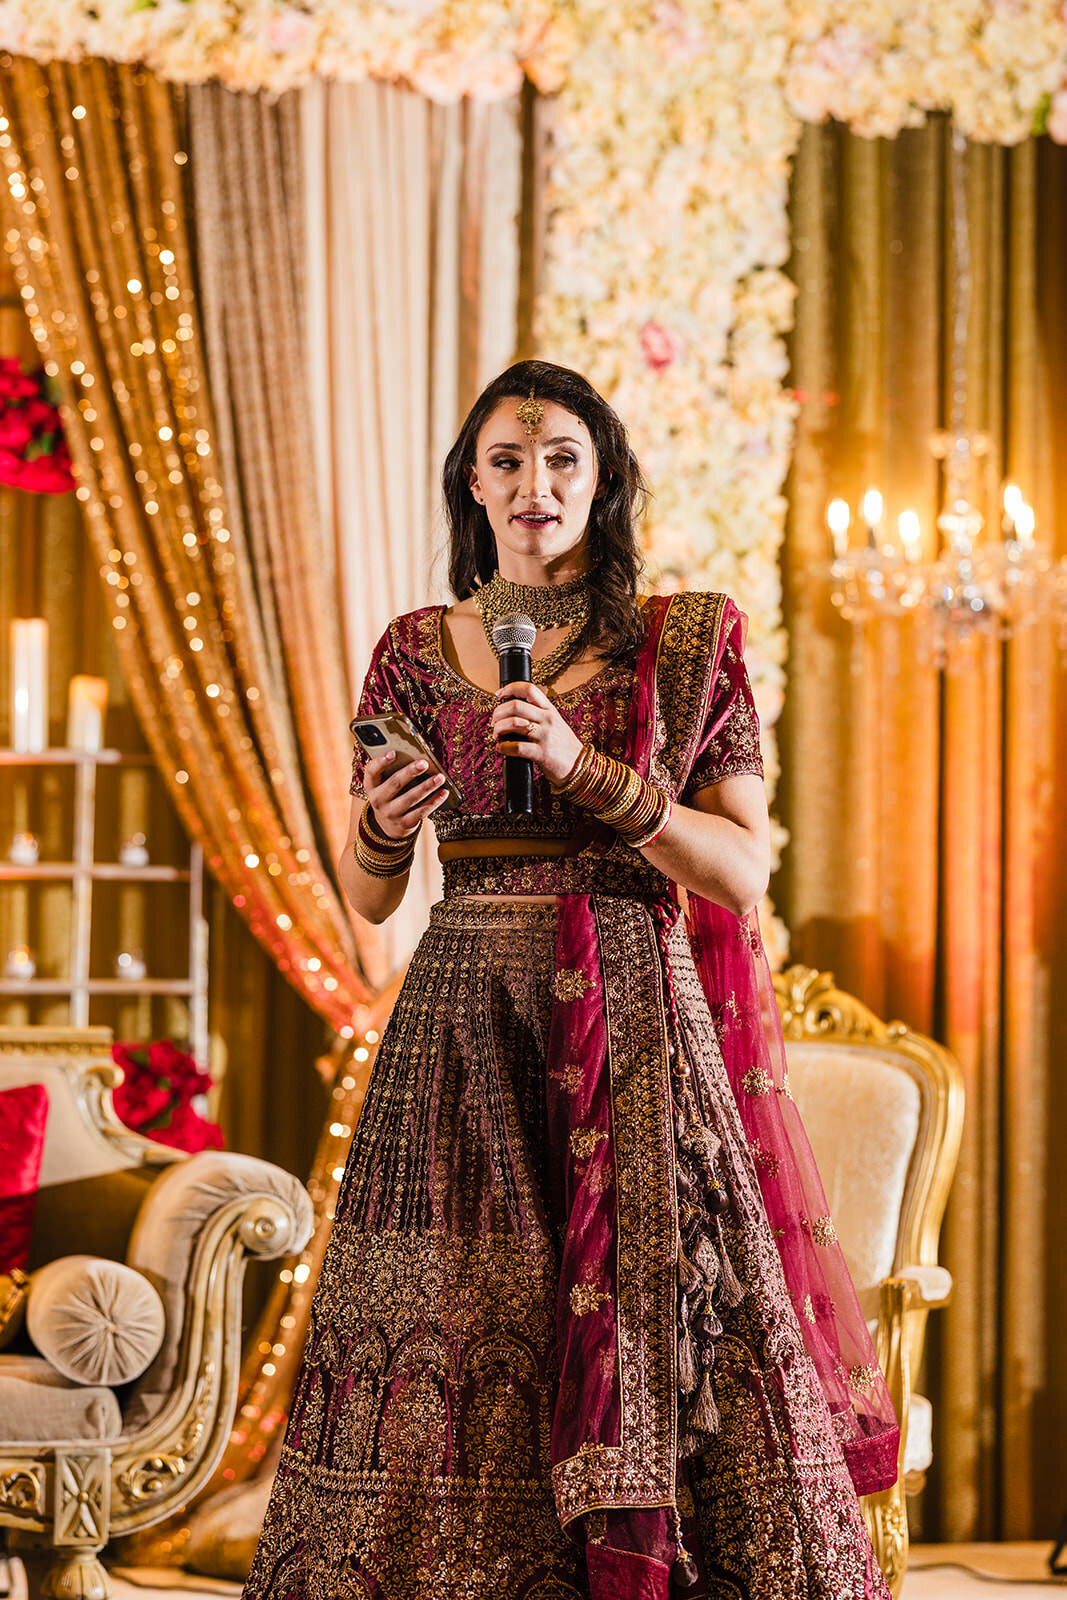 A bride dressed in a traditional burgundy lehenga speaks into a microphone, standing before an ornate wedding stage.